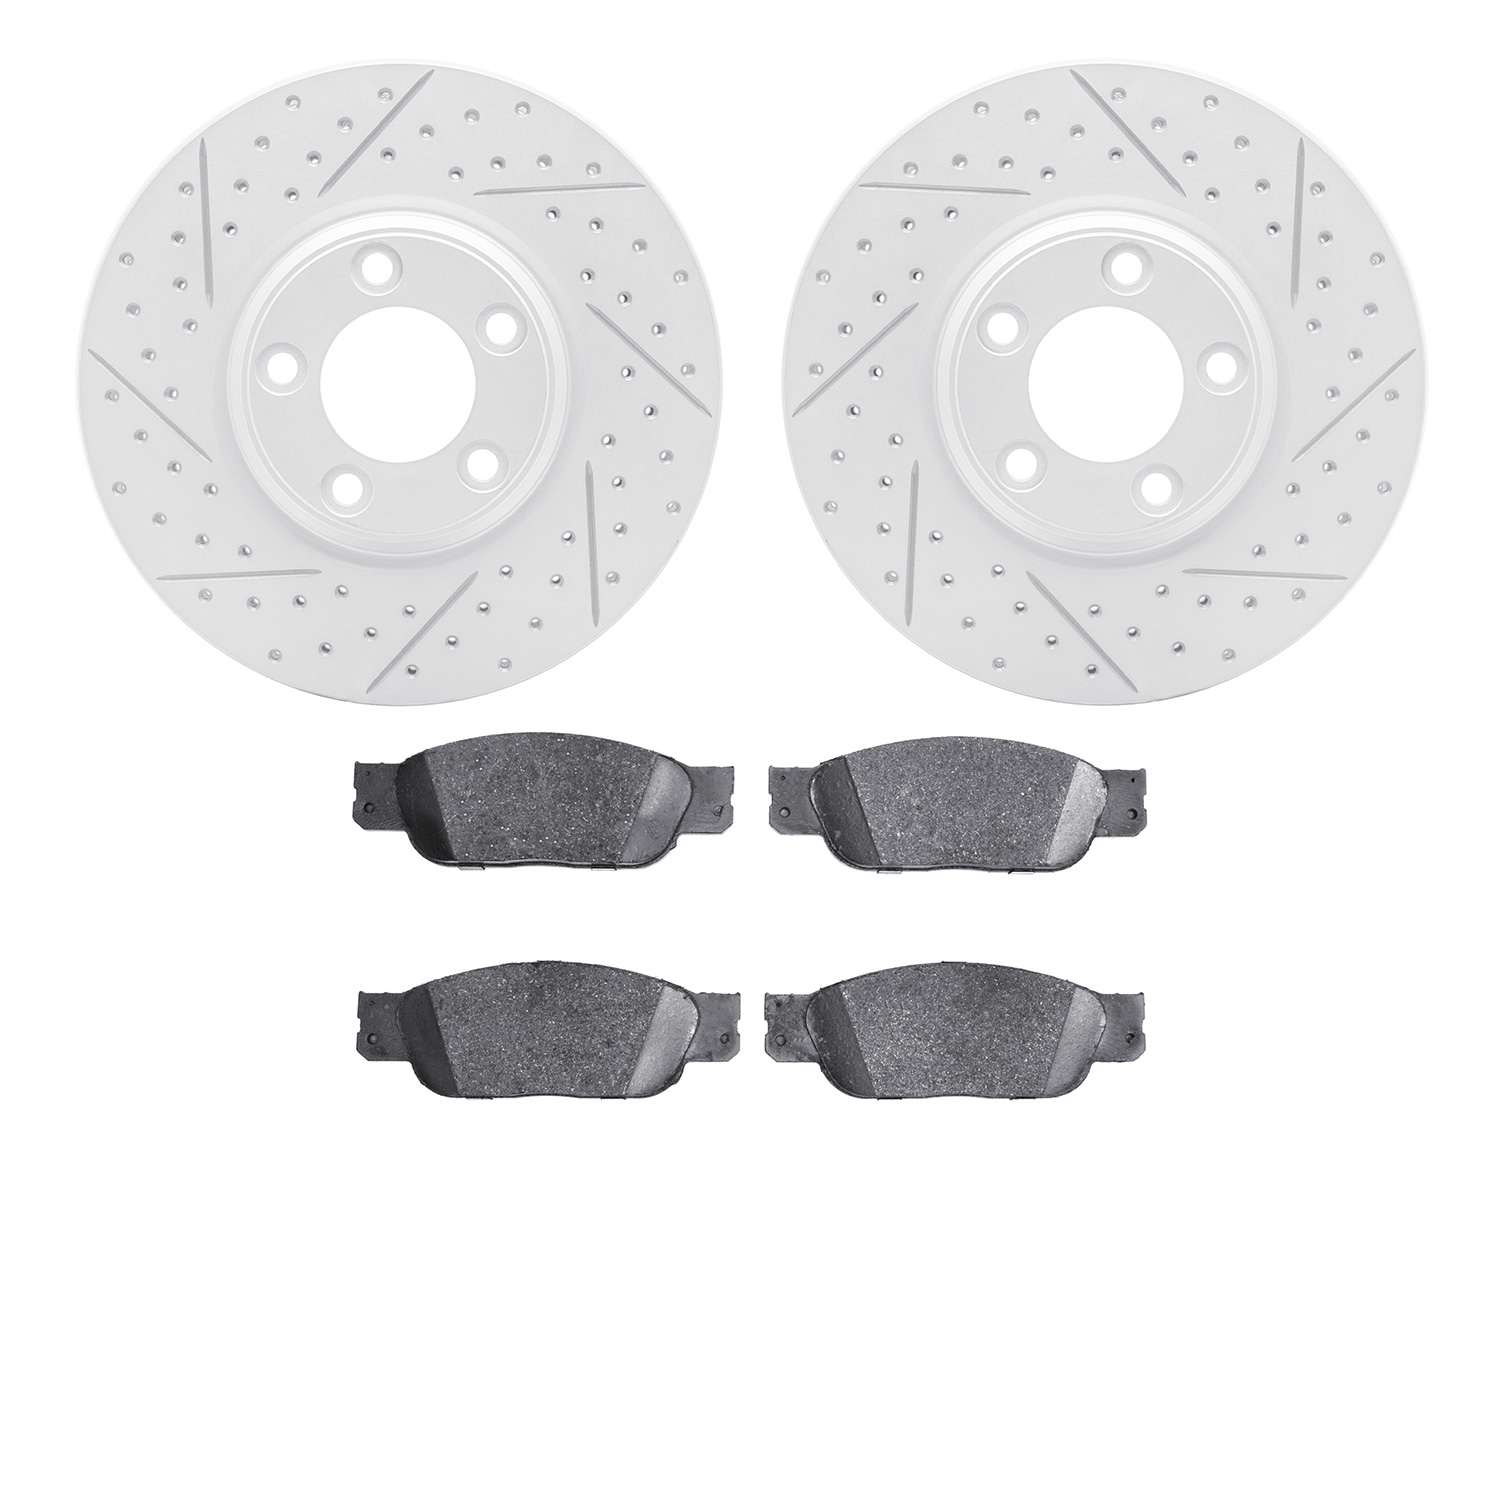 2502-54026 Geoperformance Drilled/Slotted Rotors w/5000 Advanced Brake Pads Kit, 2000-2006 Ford/Lincoln/Mercury/Mazda, Position: